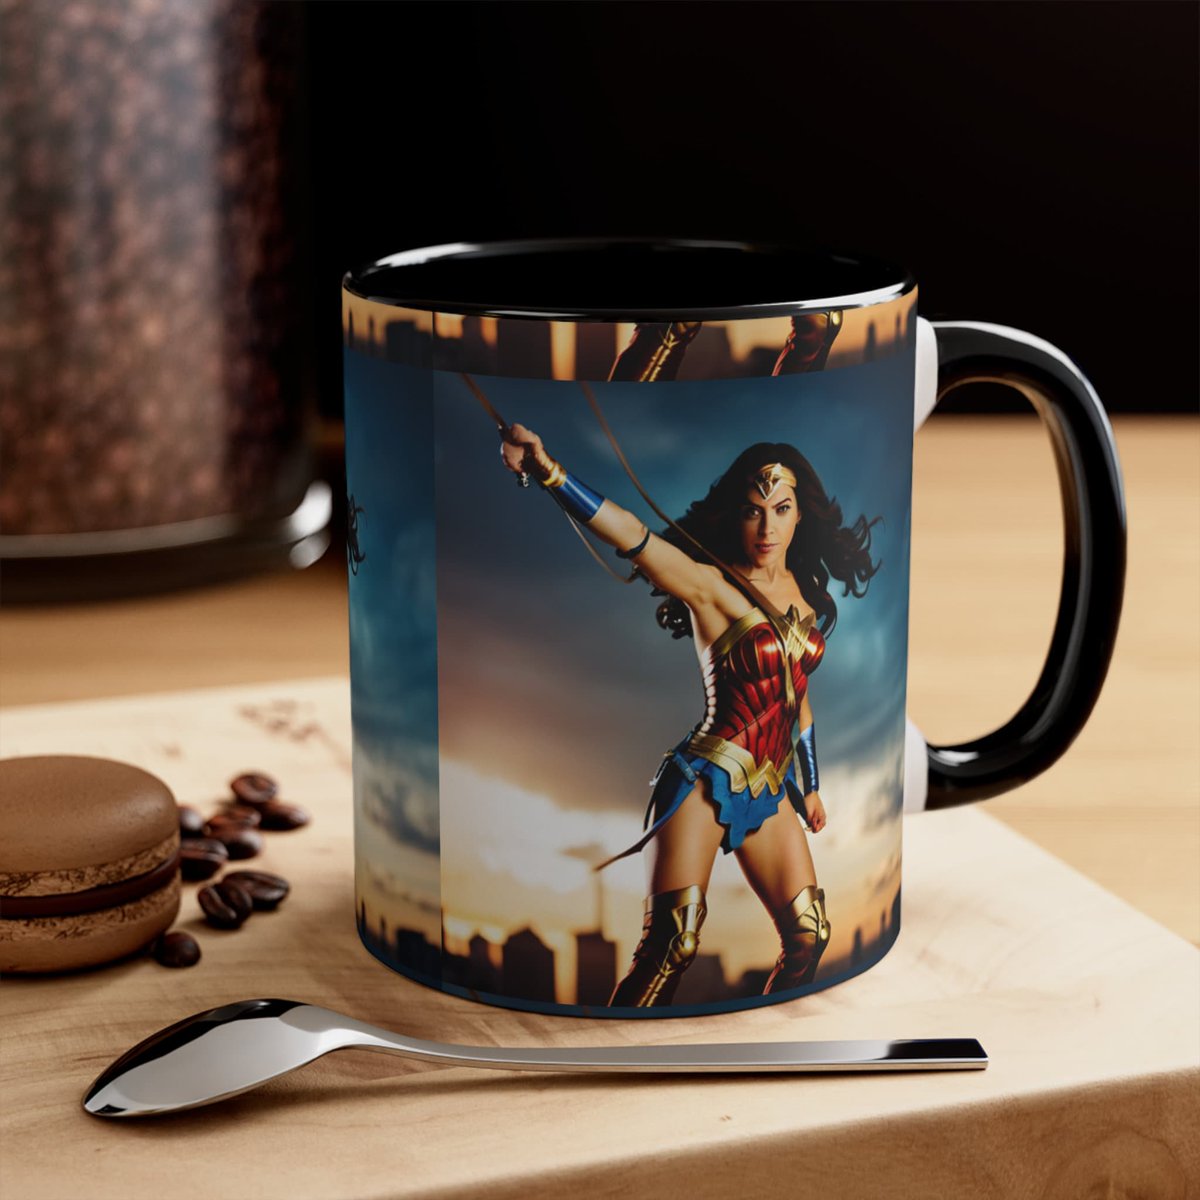 Crazy cup company Excited to share the latest addition to my #etsy shop: Wonder Woman Mugs Accent Coffee Mug, 11oz etsy.me/46ppRYy #coffeemugs #ceramicmugs #personalizedmugs #customizedmugs #funnymugs #uniquecoffeemugs #vintagecoffeemugs #noveltymugs #printedmu